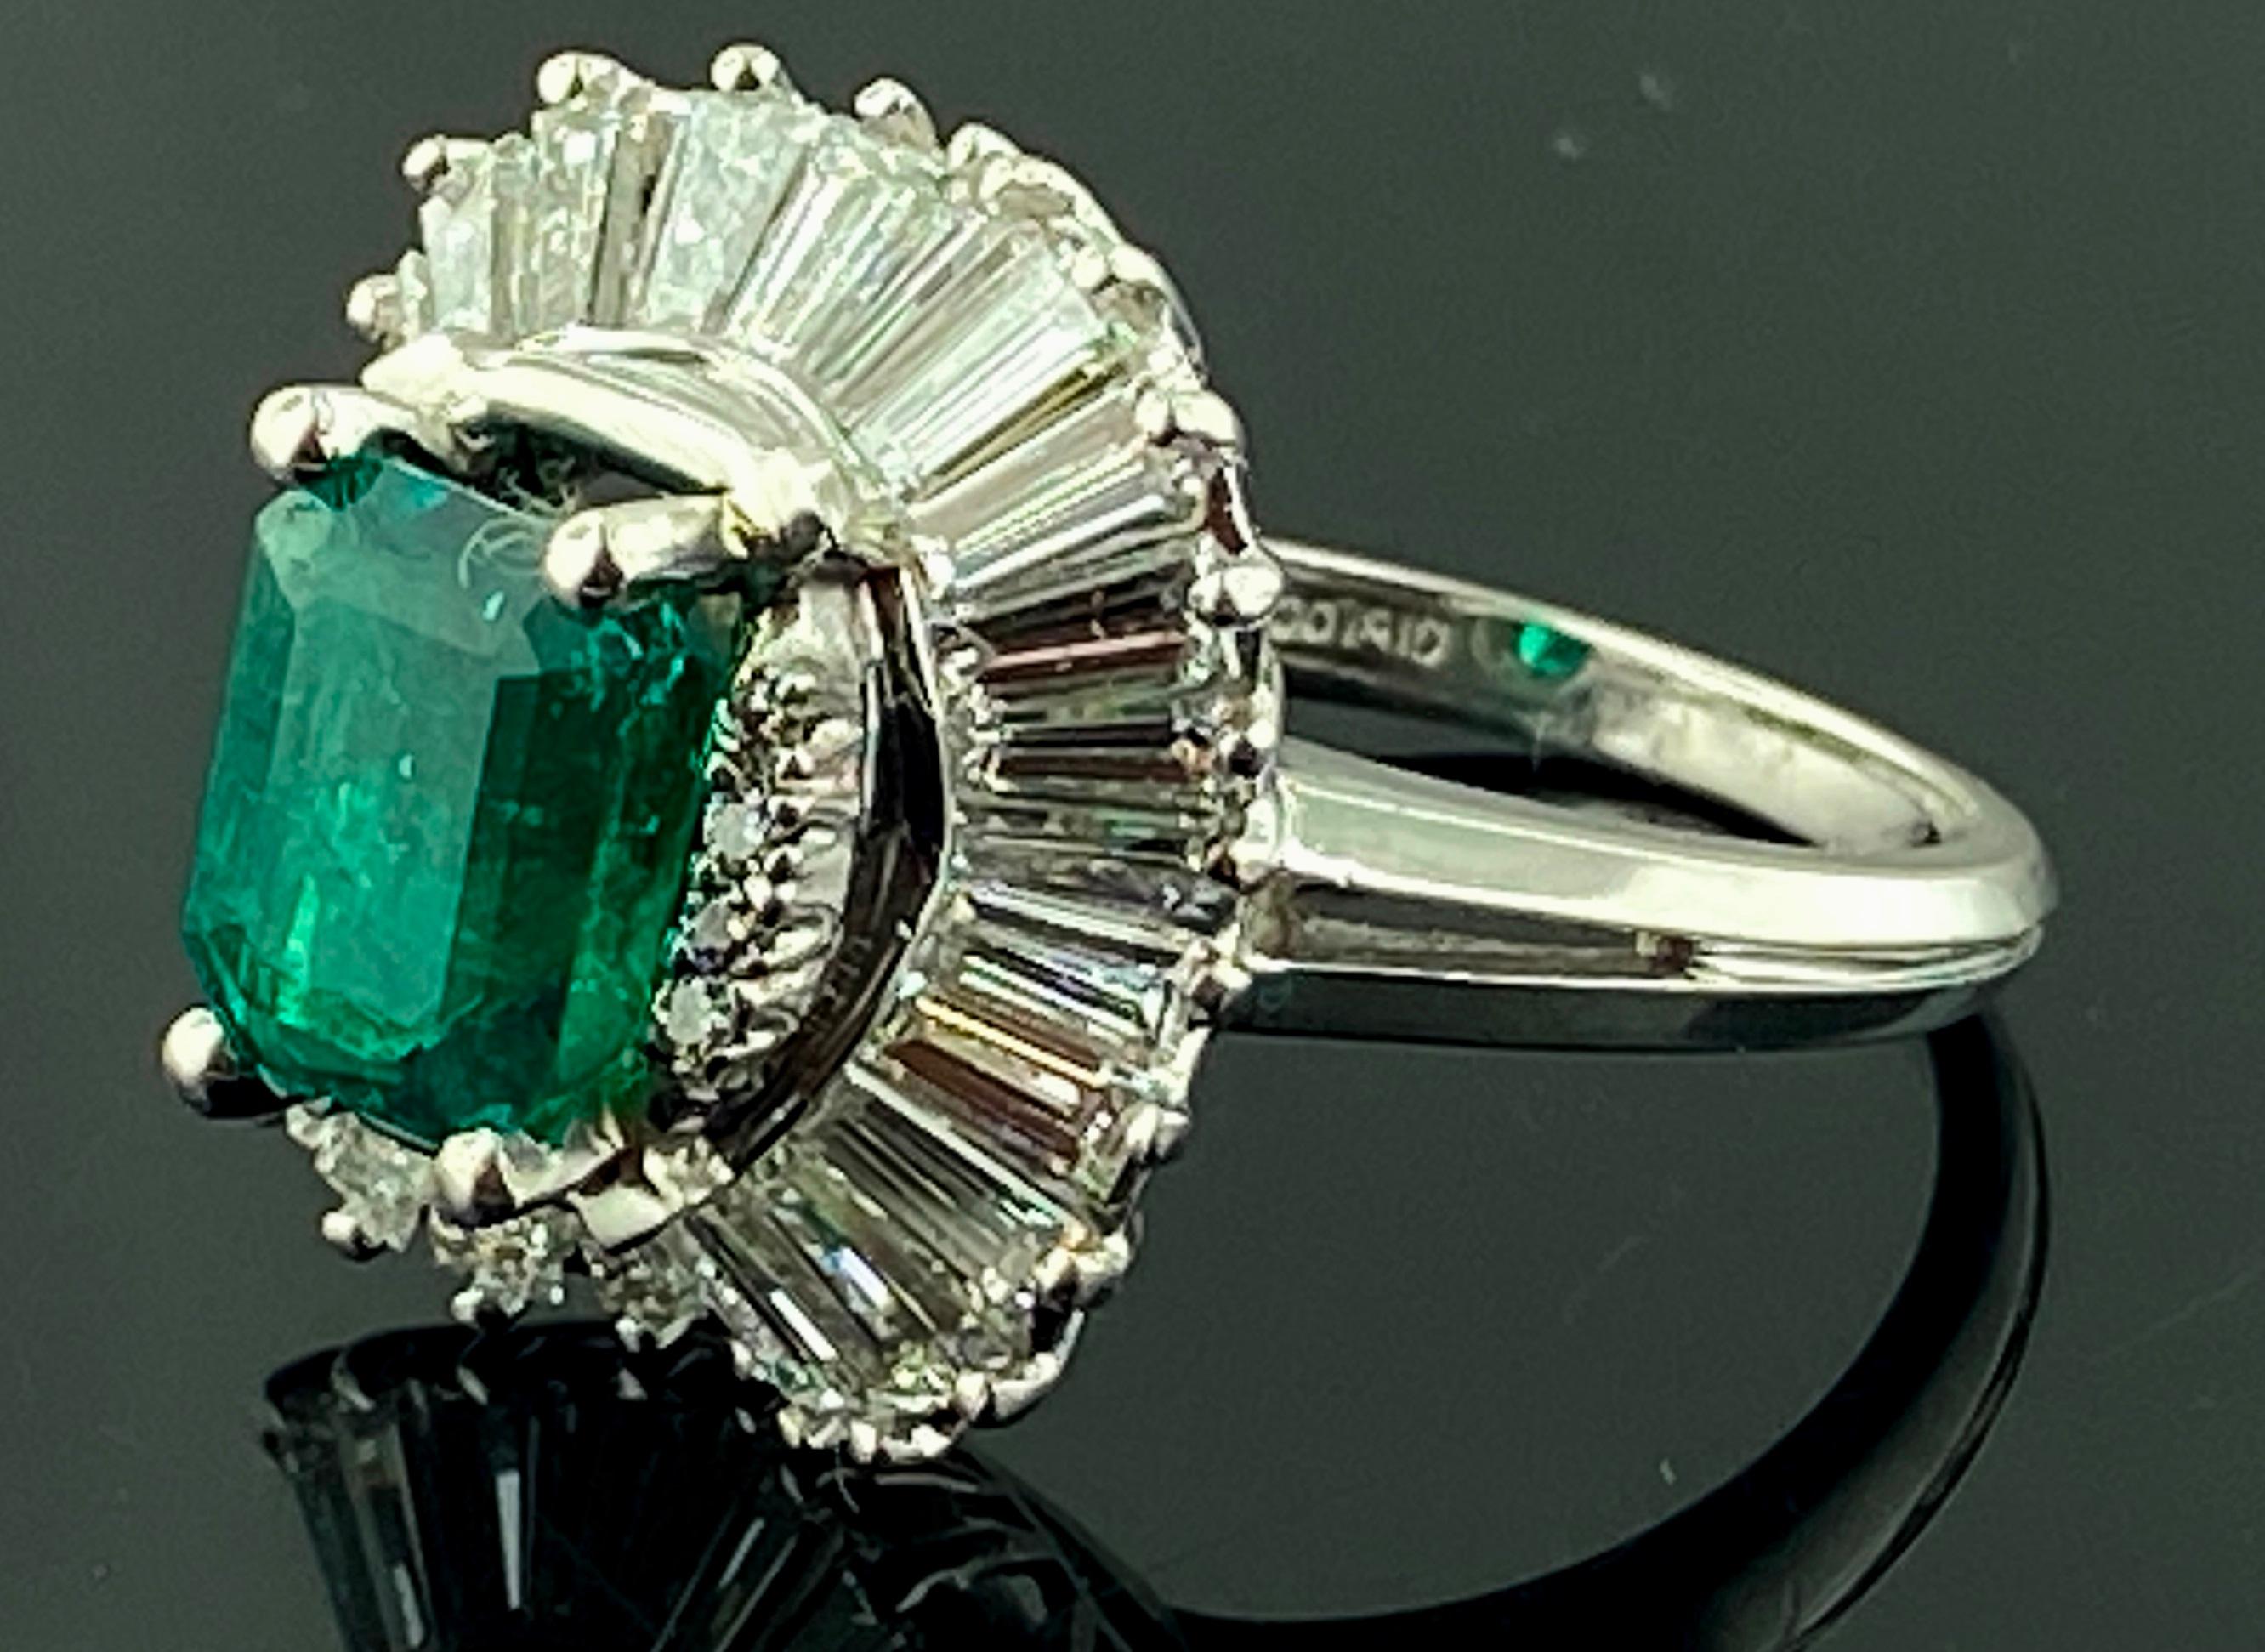 Set in Platinum is a 1.92 carat emerald cut Emerald flanked with 8 round brilliant cut diamonds, surrounded by 28 baguette cut diamonds with a total diamond weight of 1.50 carats.  Color is F-G, Clarity is VVS-2.  Ring size is 5.5.